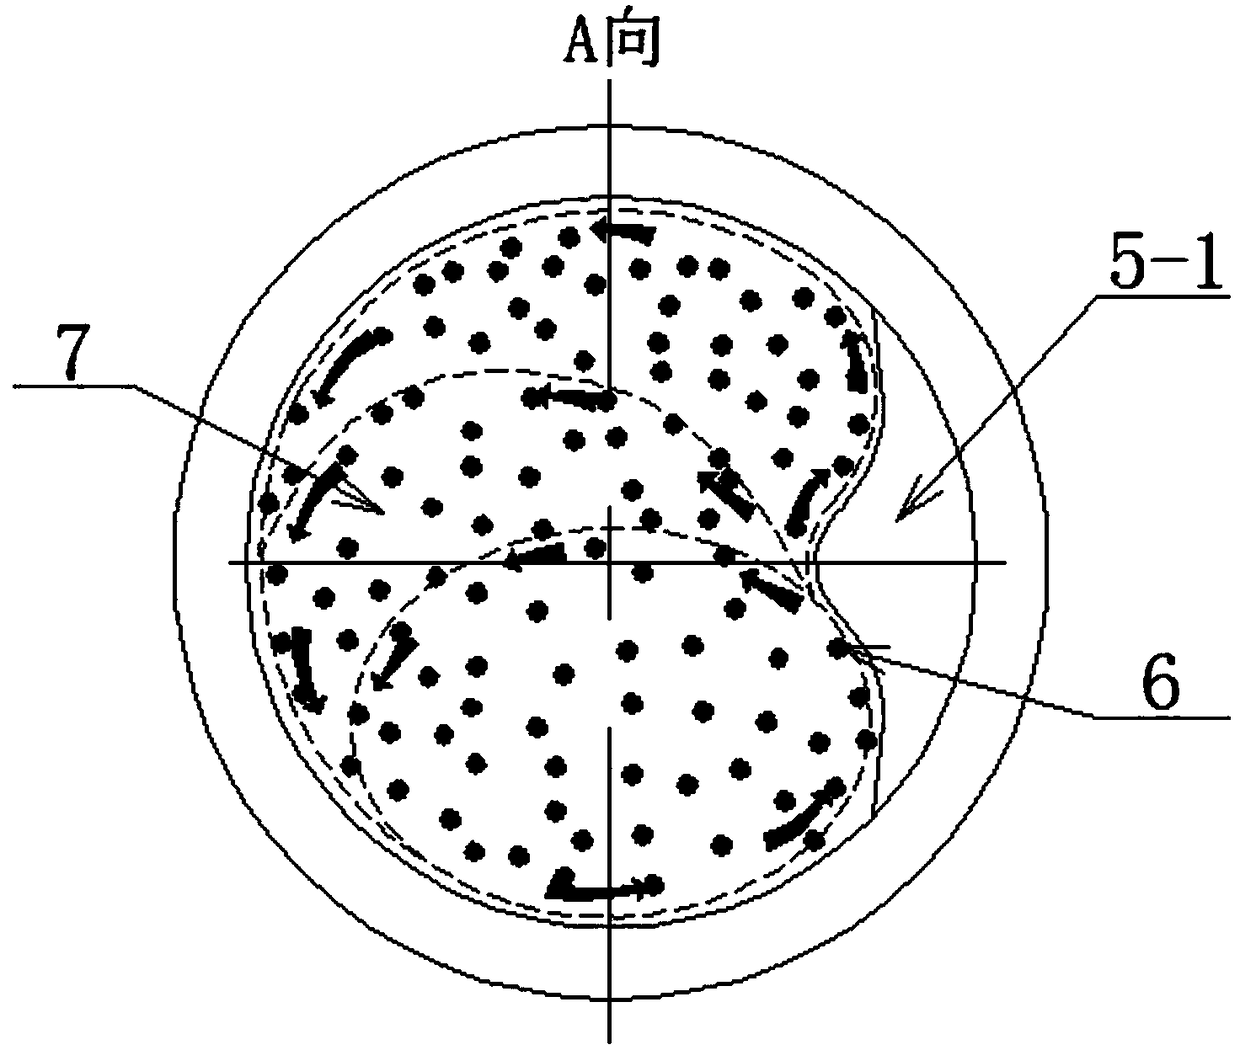 Permanent magnetic stirring device for semi-solid slurry preparation of metals